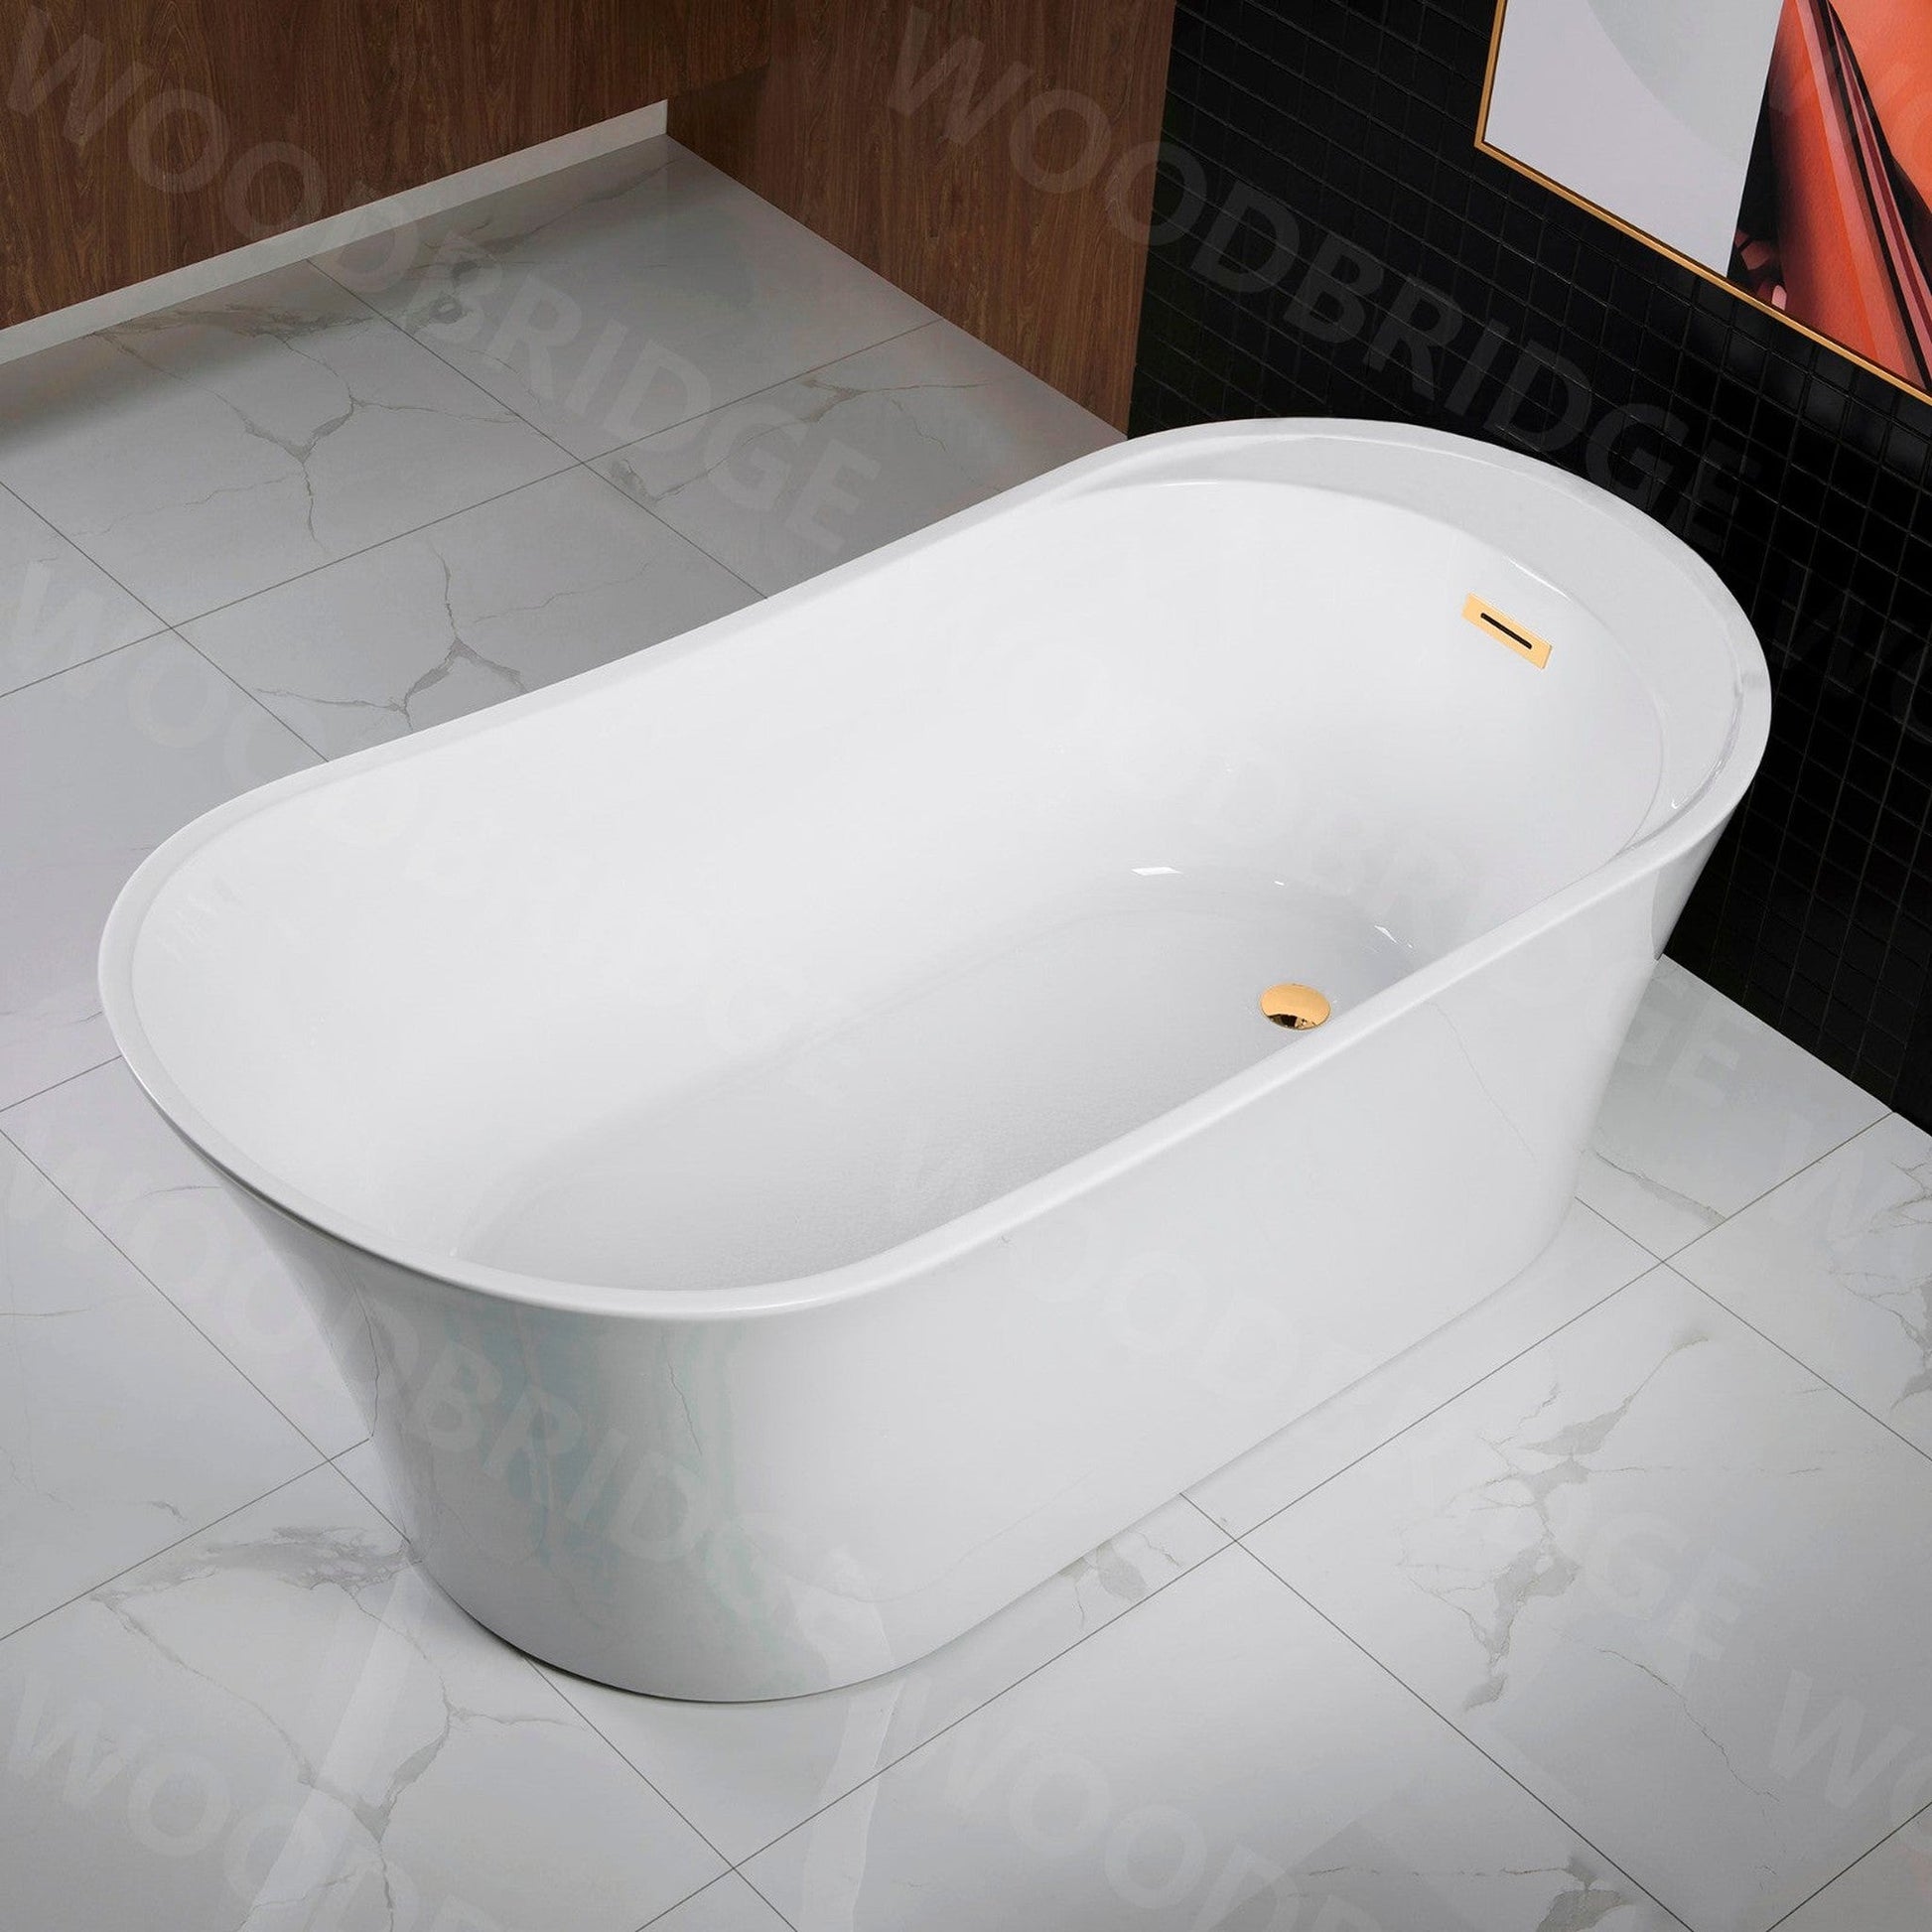 WoodBridge B0083 59" White Acrylic Freestanding Soaking Bathtub With Brushed Gold Drain, Overflow, F0073BGVT Tub Filler and Caddy Tray